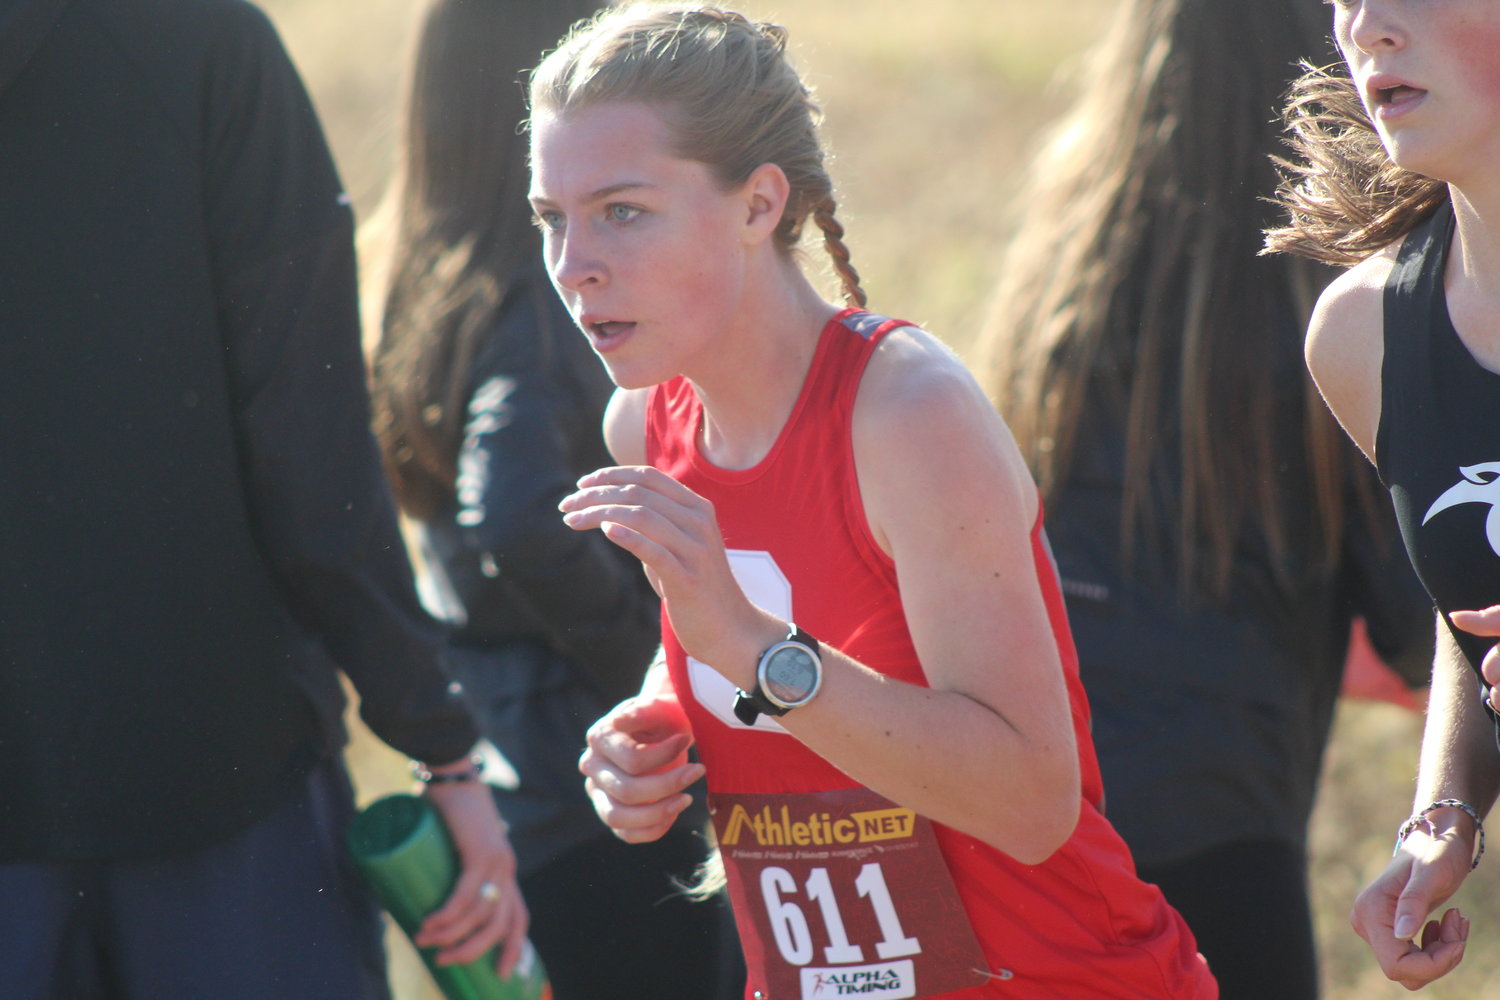 Southmont’s Faith Allen had her best finish of her career on Saturday at the Shelbyville Semi-State where she placed 29th. The Mountie senior concluded what’s been nothing short of a phenomenal XC career.